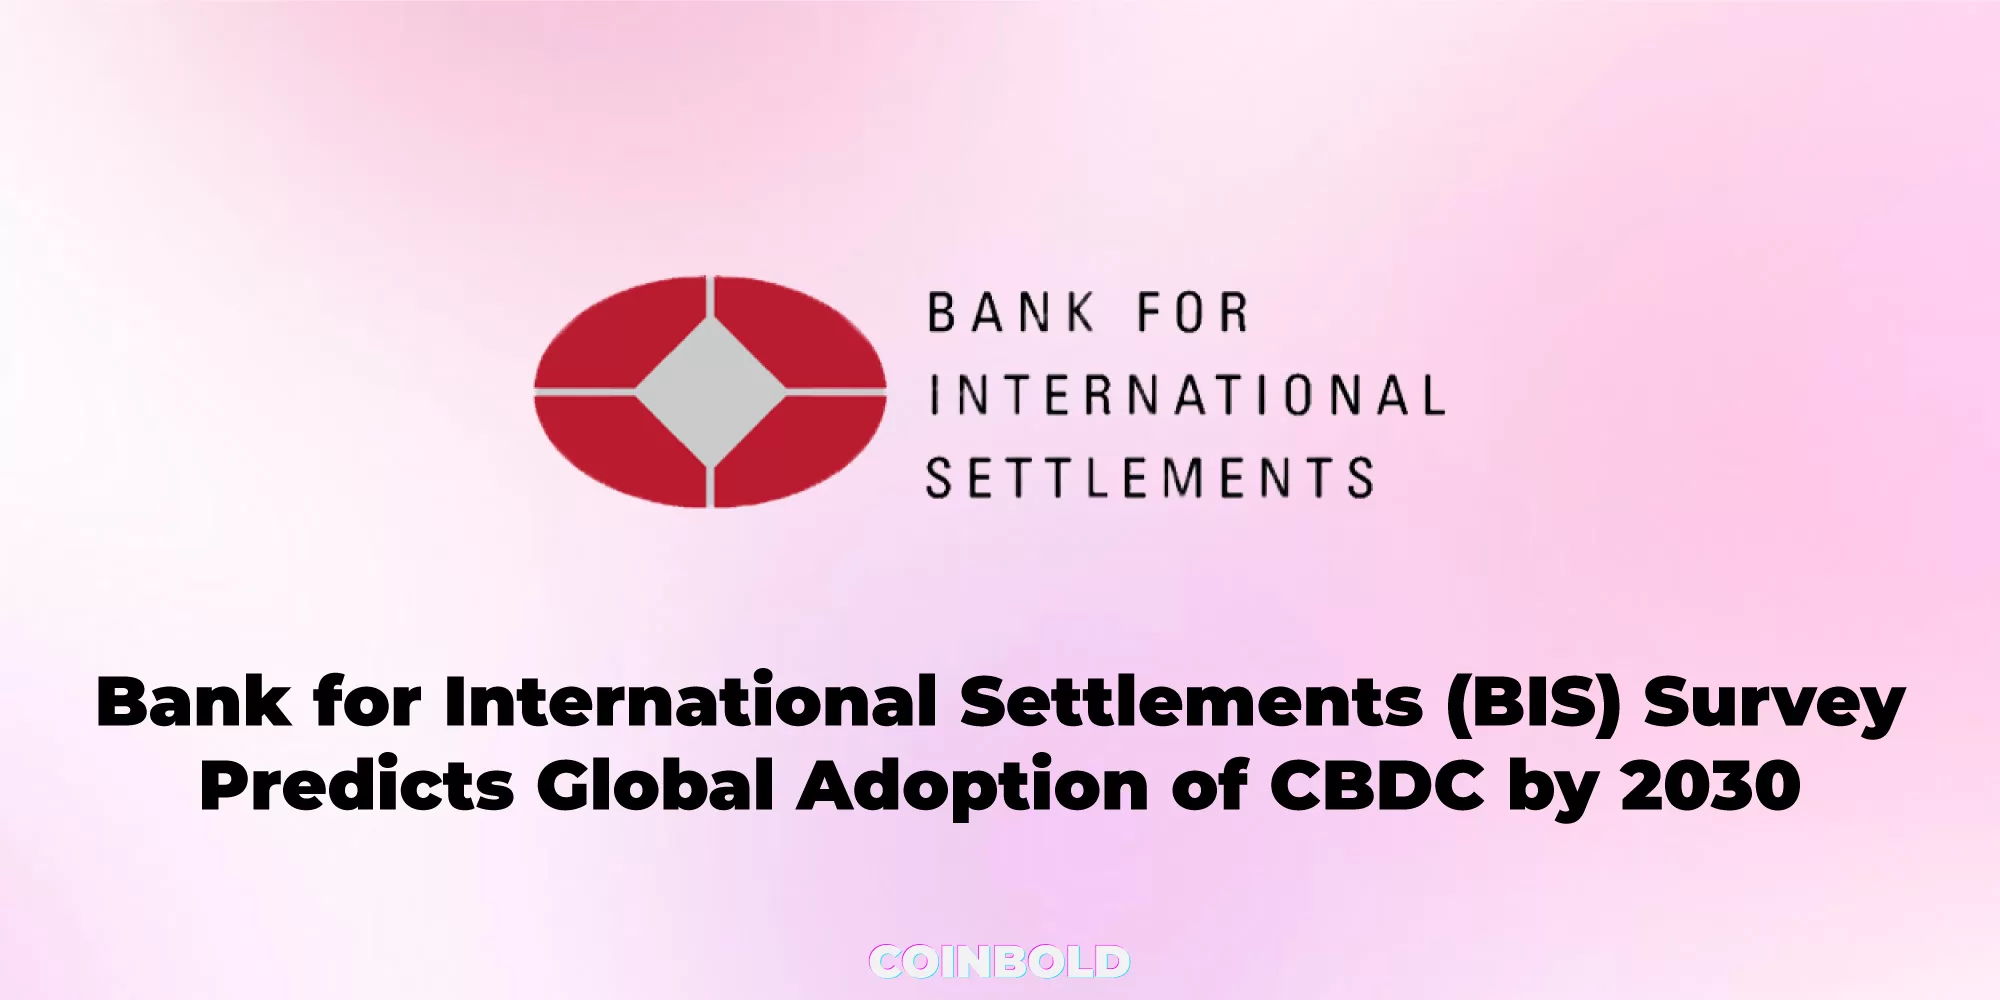 Bank for International Settlements (BIS) Survey Predicts Global Adoption of Central Bank Digital Currencies (CBDCs) by 2030